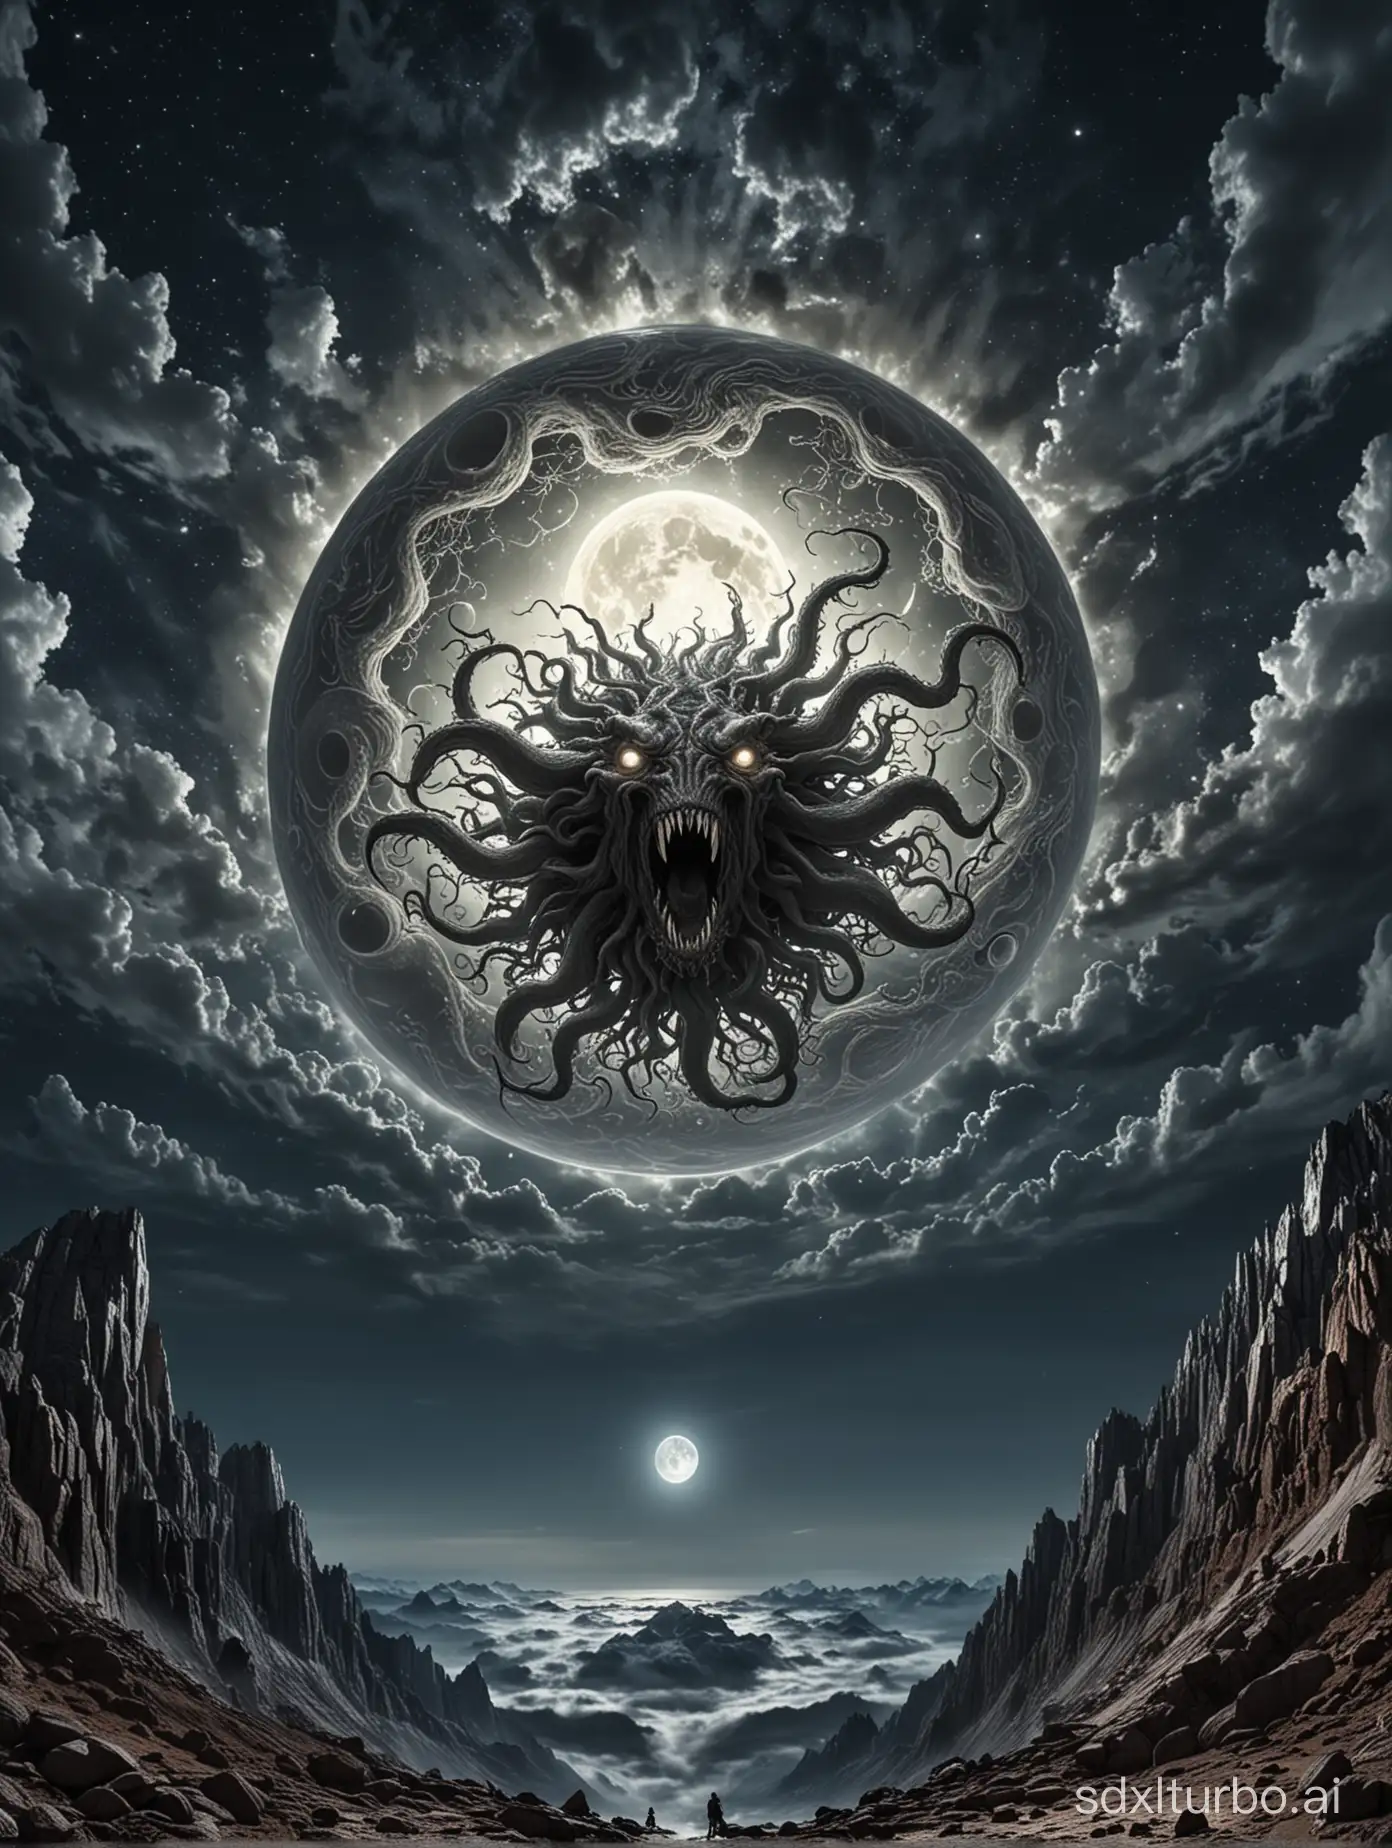 Yog Sothoth in the sky as the moon while screaming, illuminating, HDR, realistic approach, camera POV from a mountain